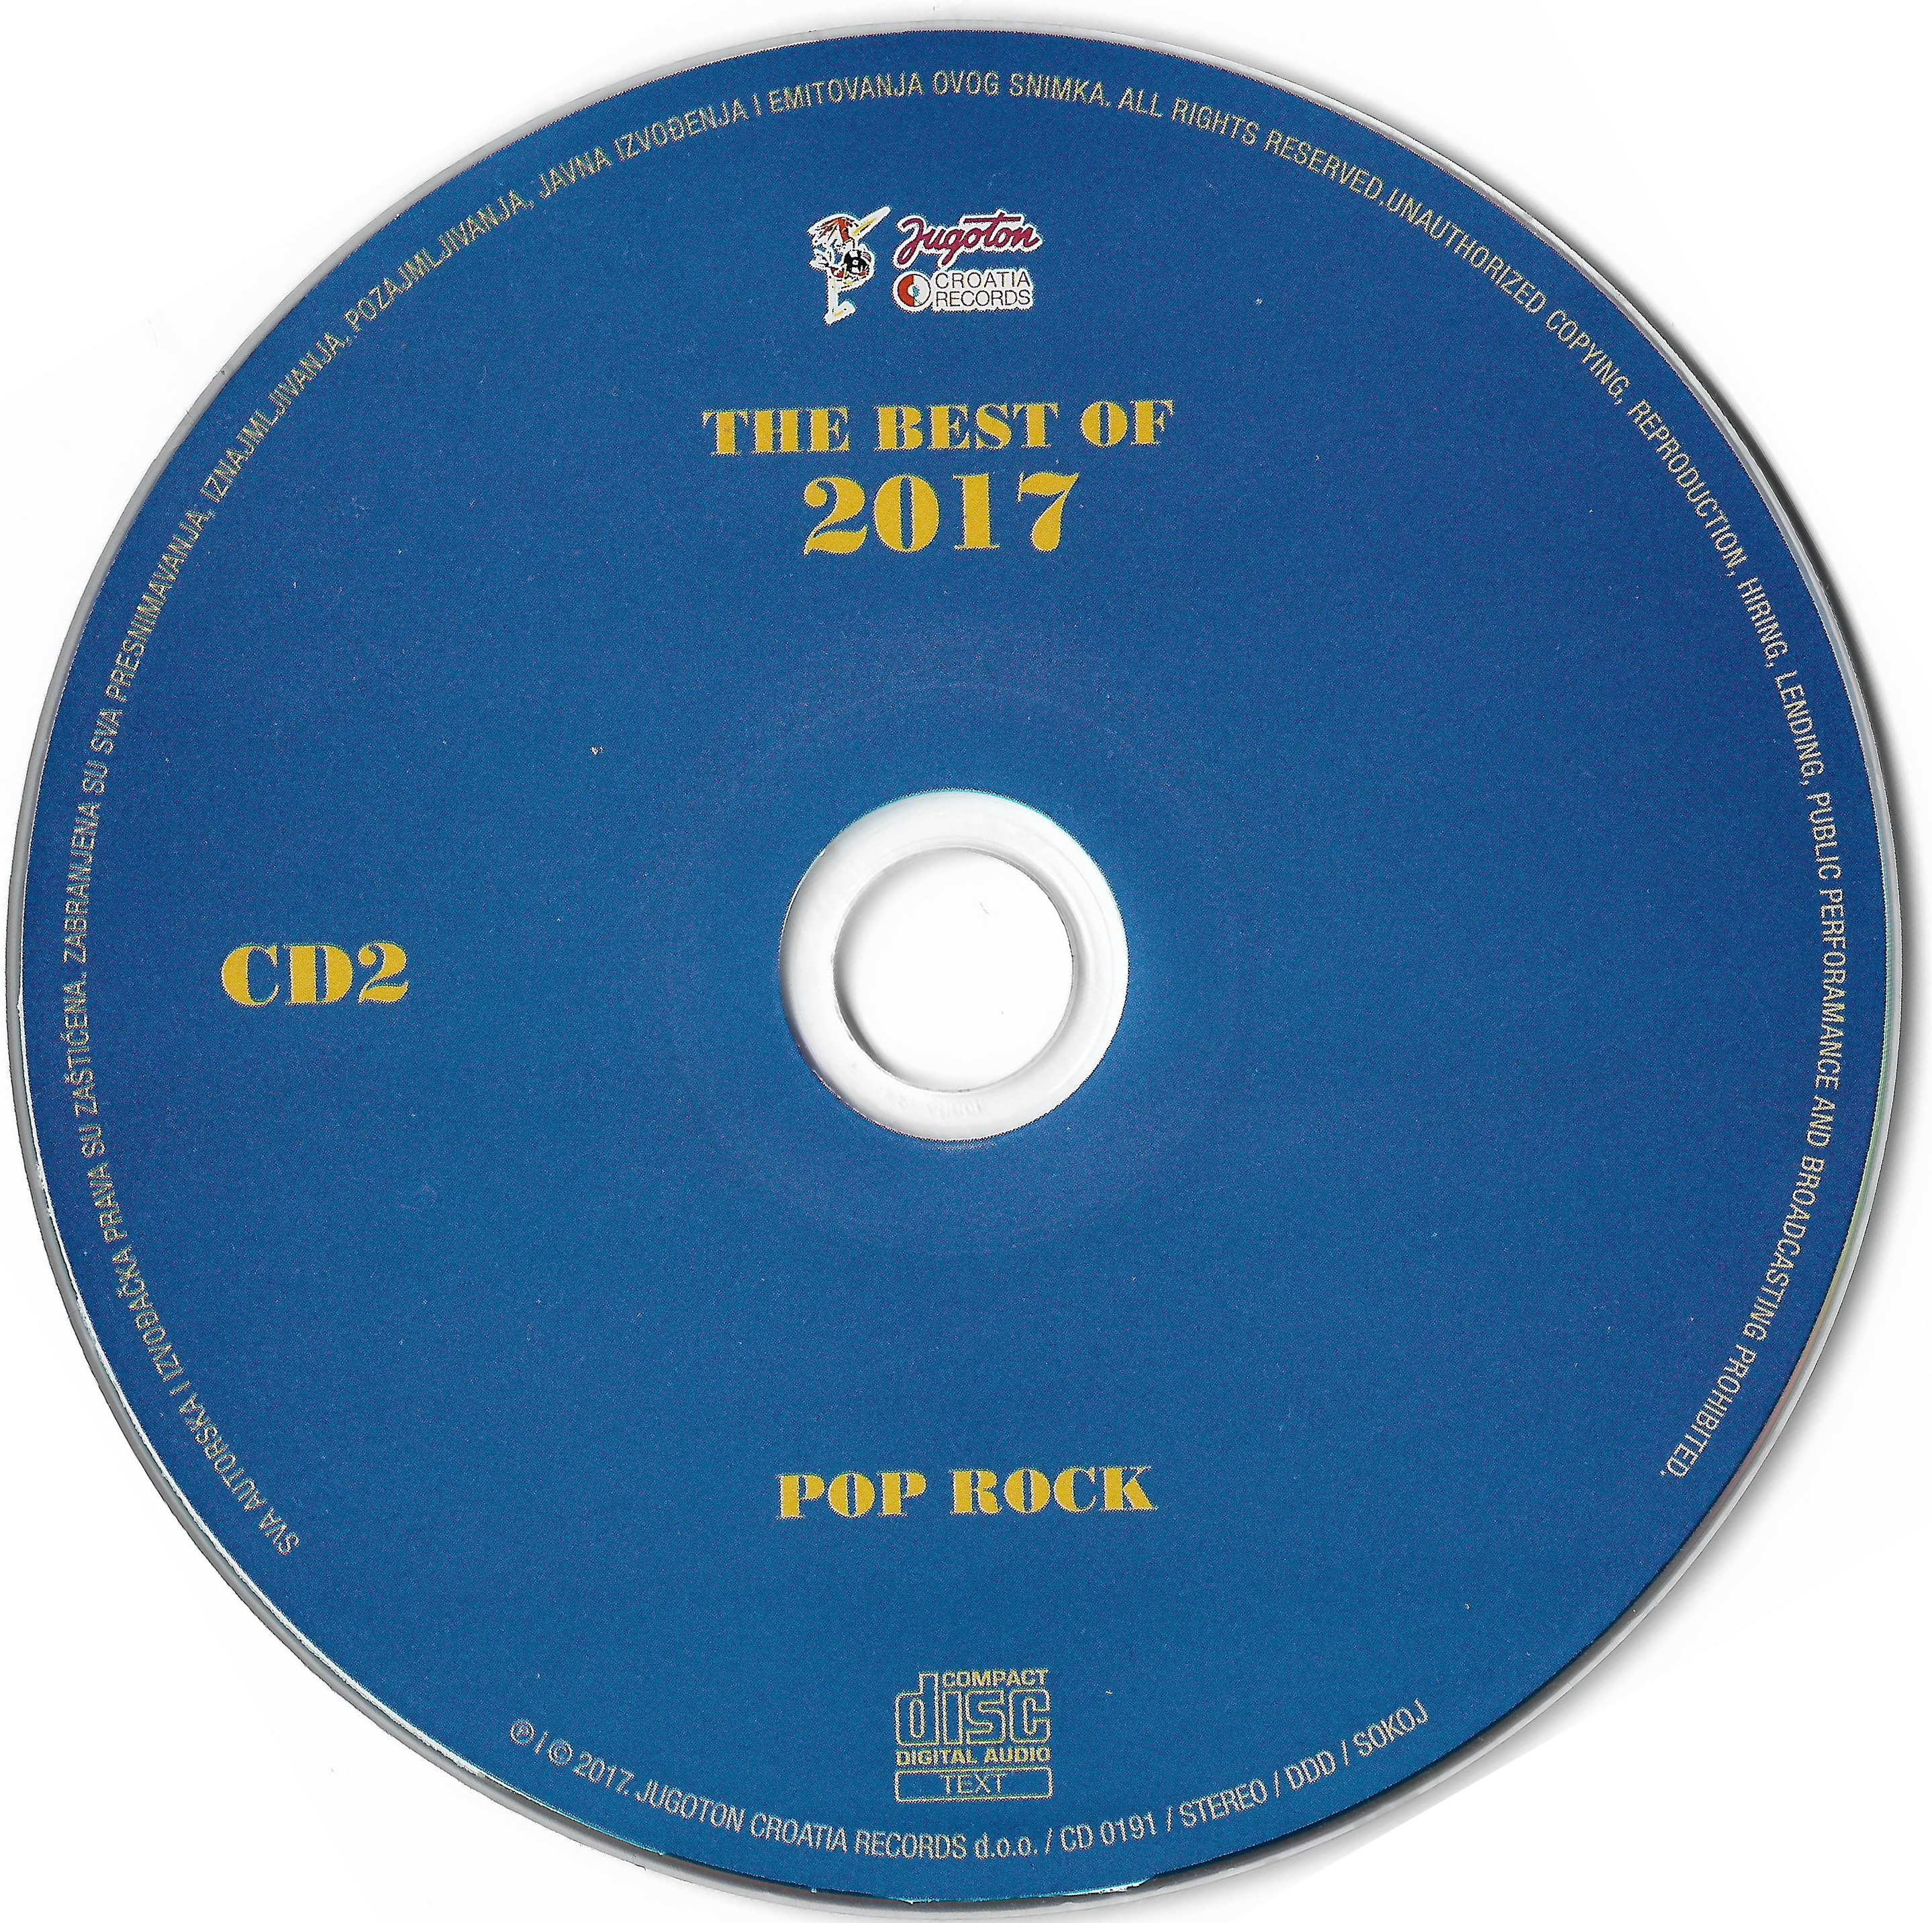 The Best Of 2017 CD 2